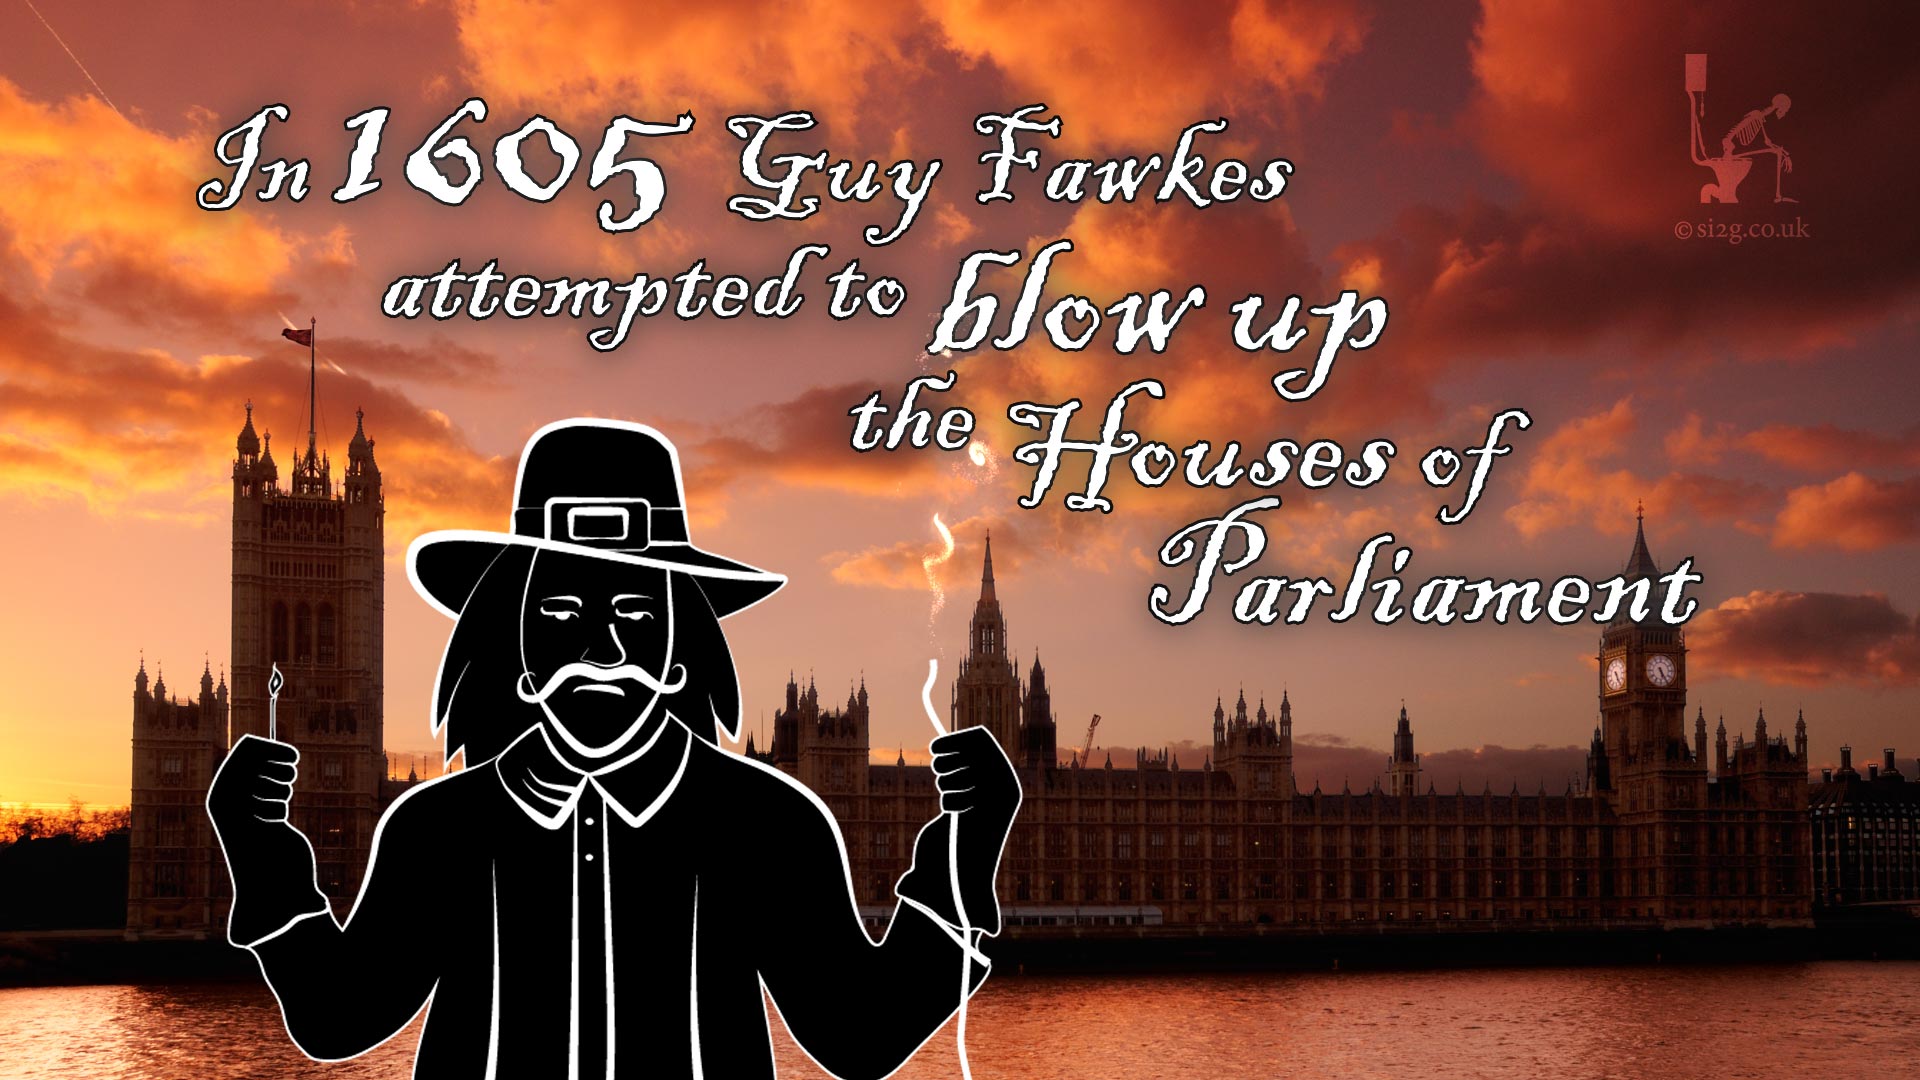 Frame from Fireworks Video - This Guy Fawkes character was used in a short fireworks message posted on a clients YouTube channel and social media sites.